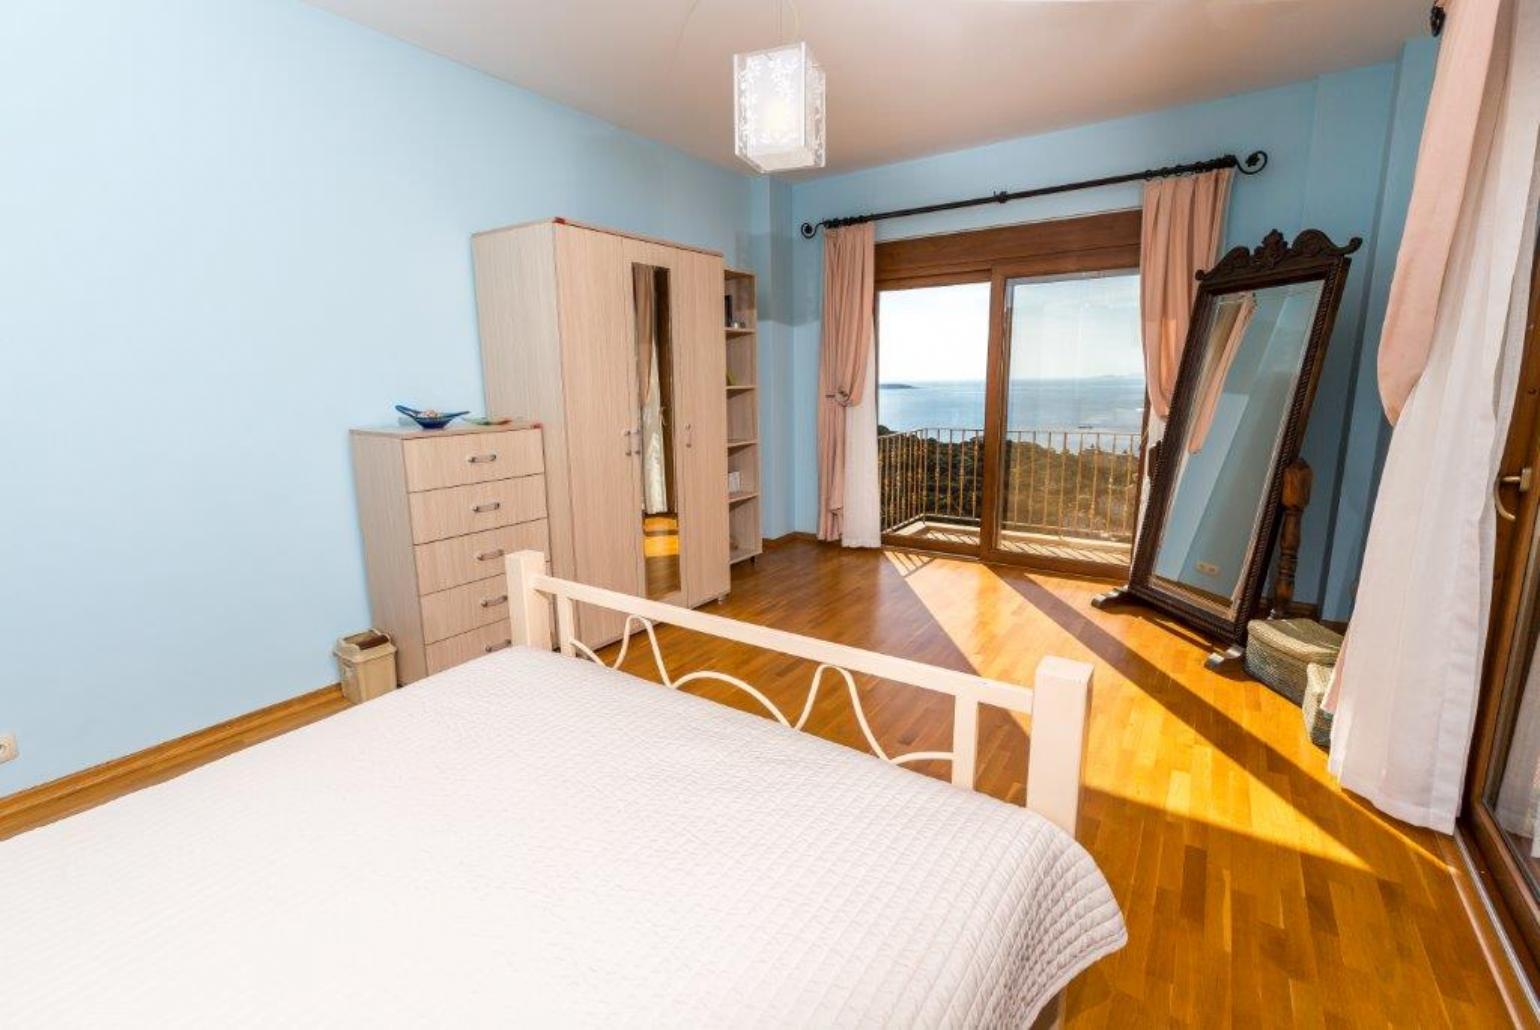 Double Bedroom with balcony access